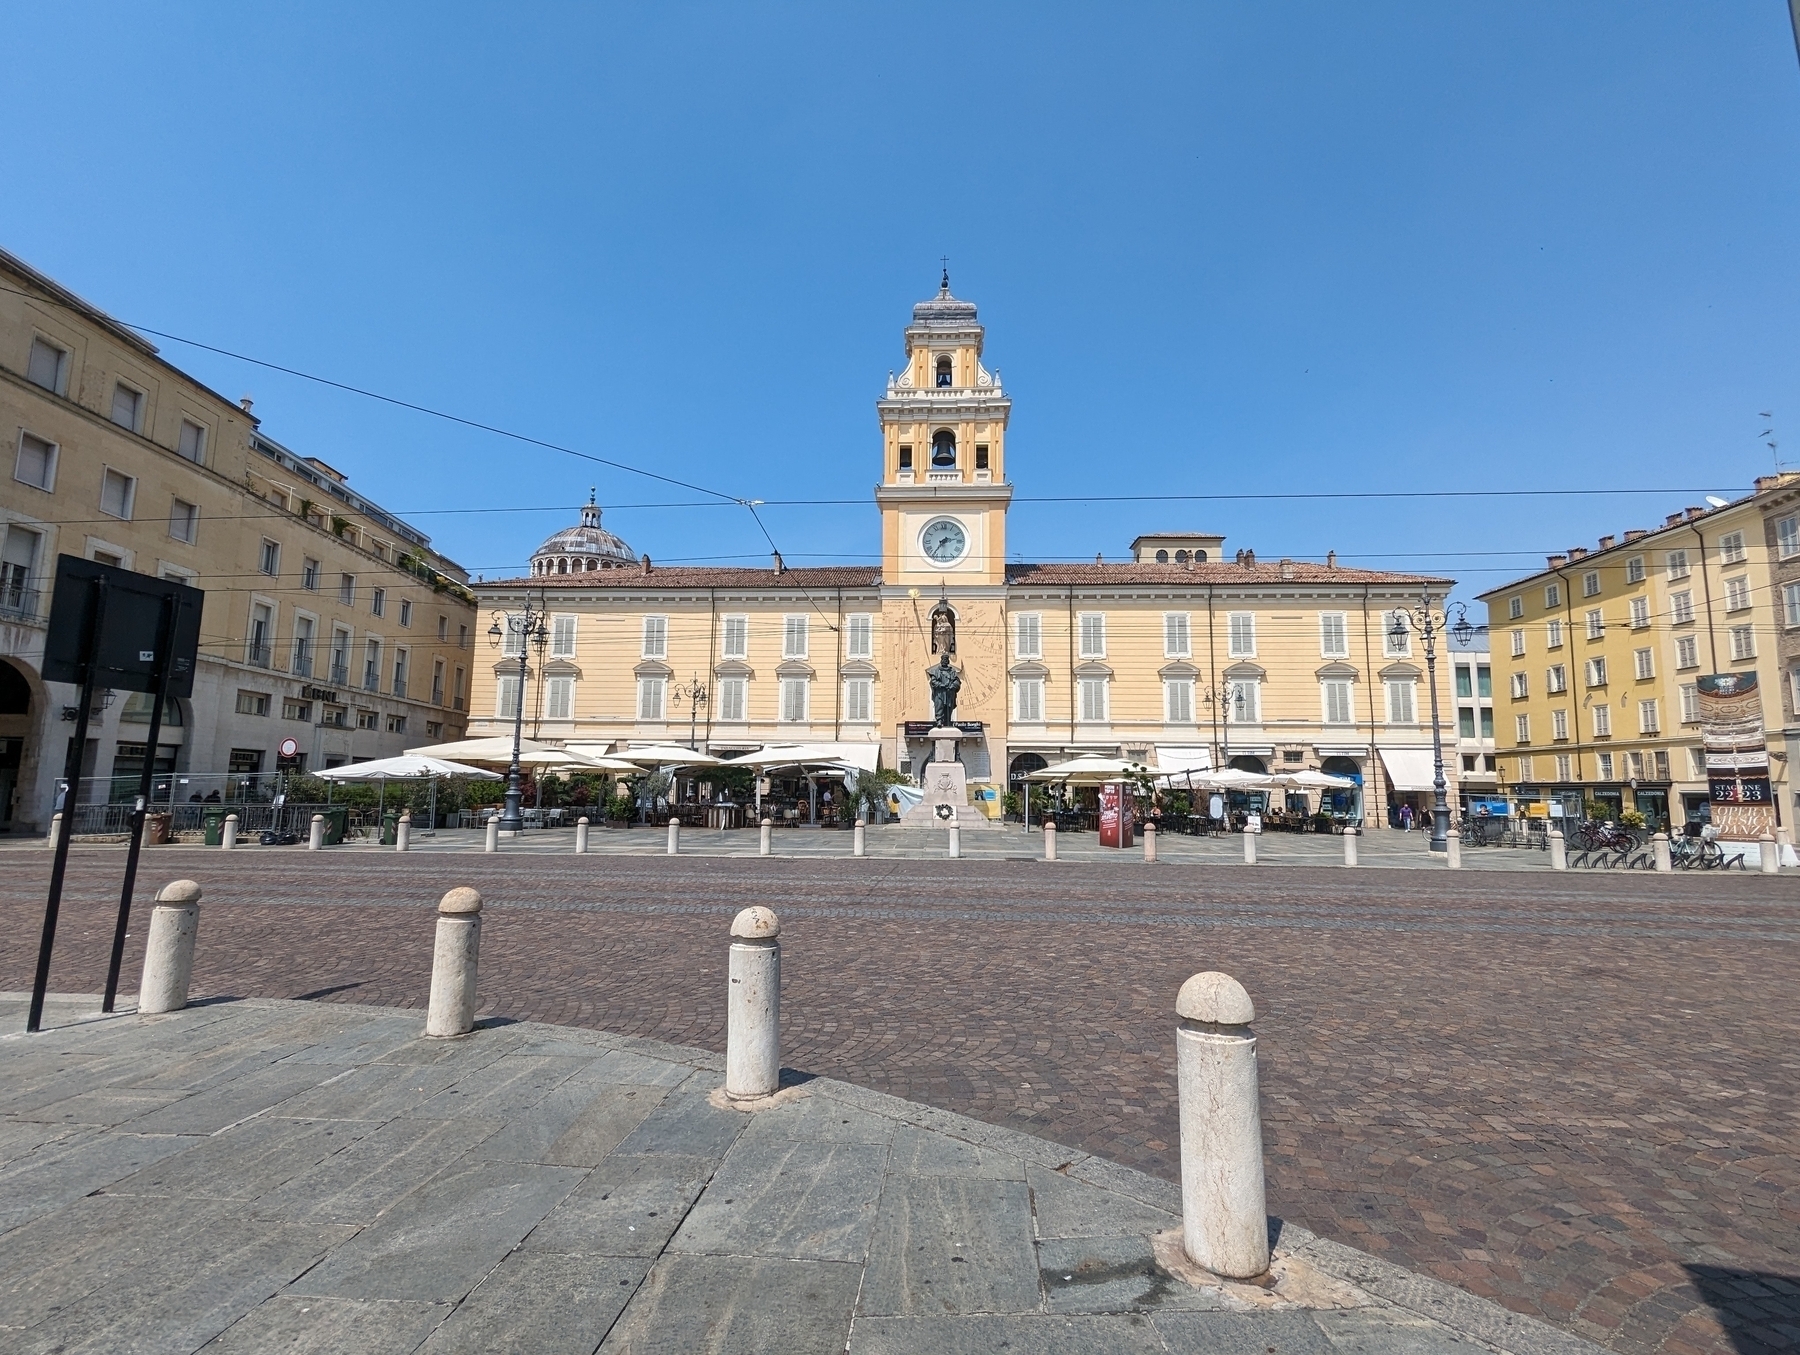 Front of the Palazzo del Governatore, a two story palace made of yellow stone, with a clock tower in the center. The front consists of umbrellas for outdoor dining of the cafe. In front of that is a street made of cobblestones, surrounded by bollards, and with trolly-bus overhead wires. The sky was sunny and cloudless.